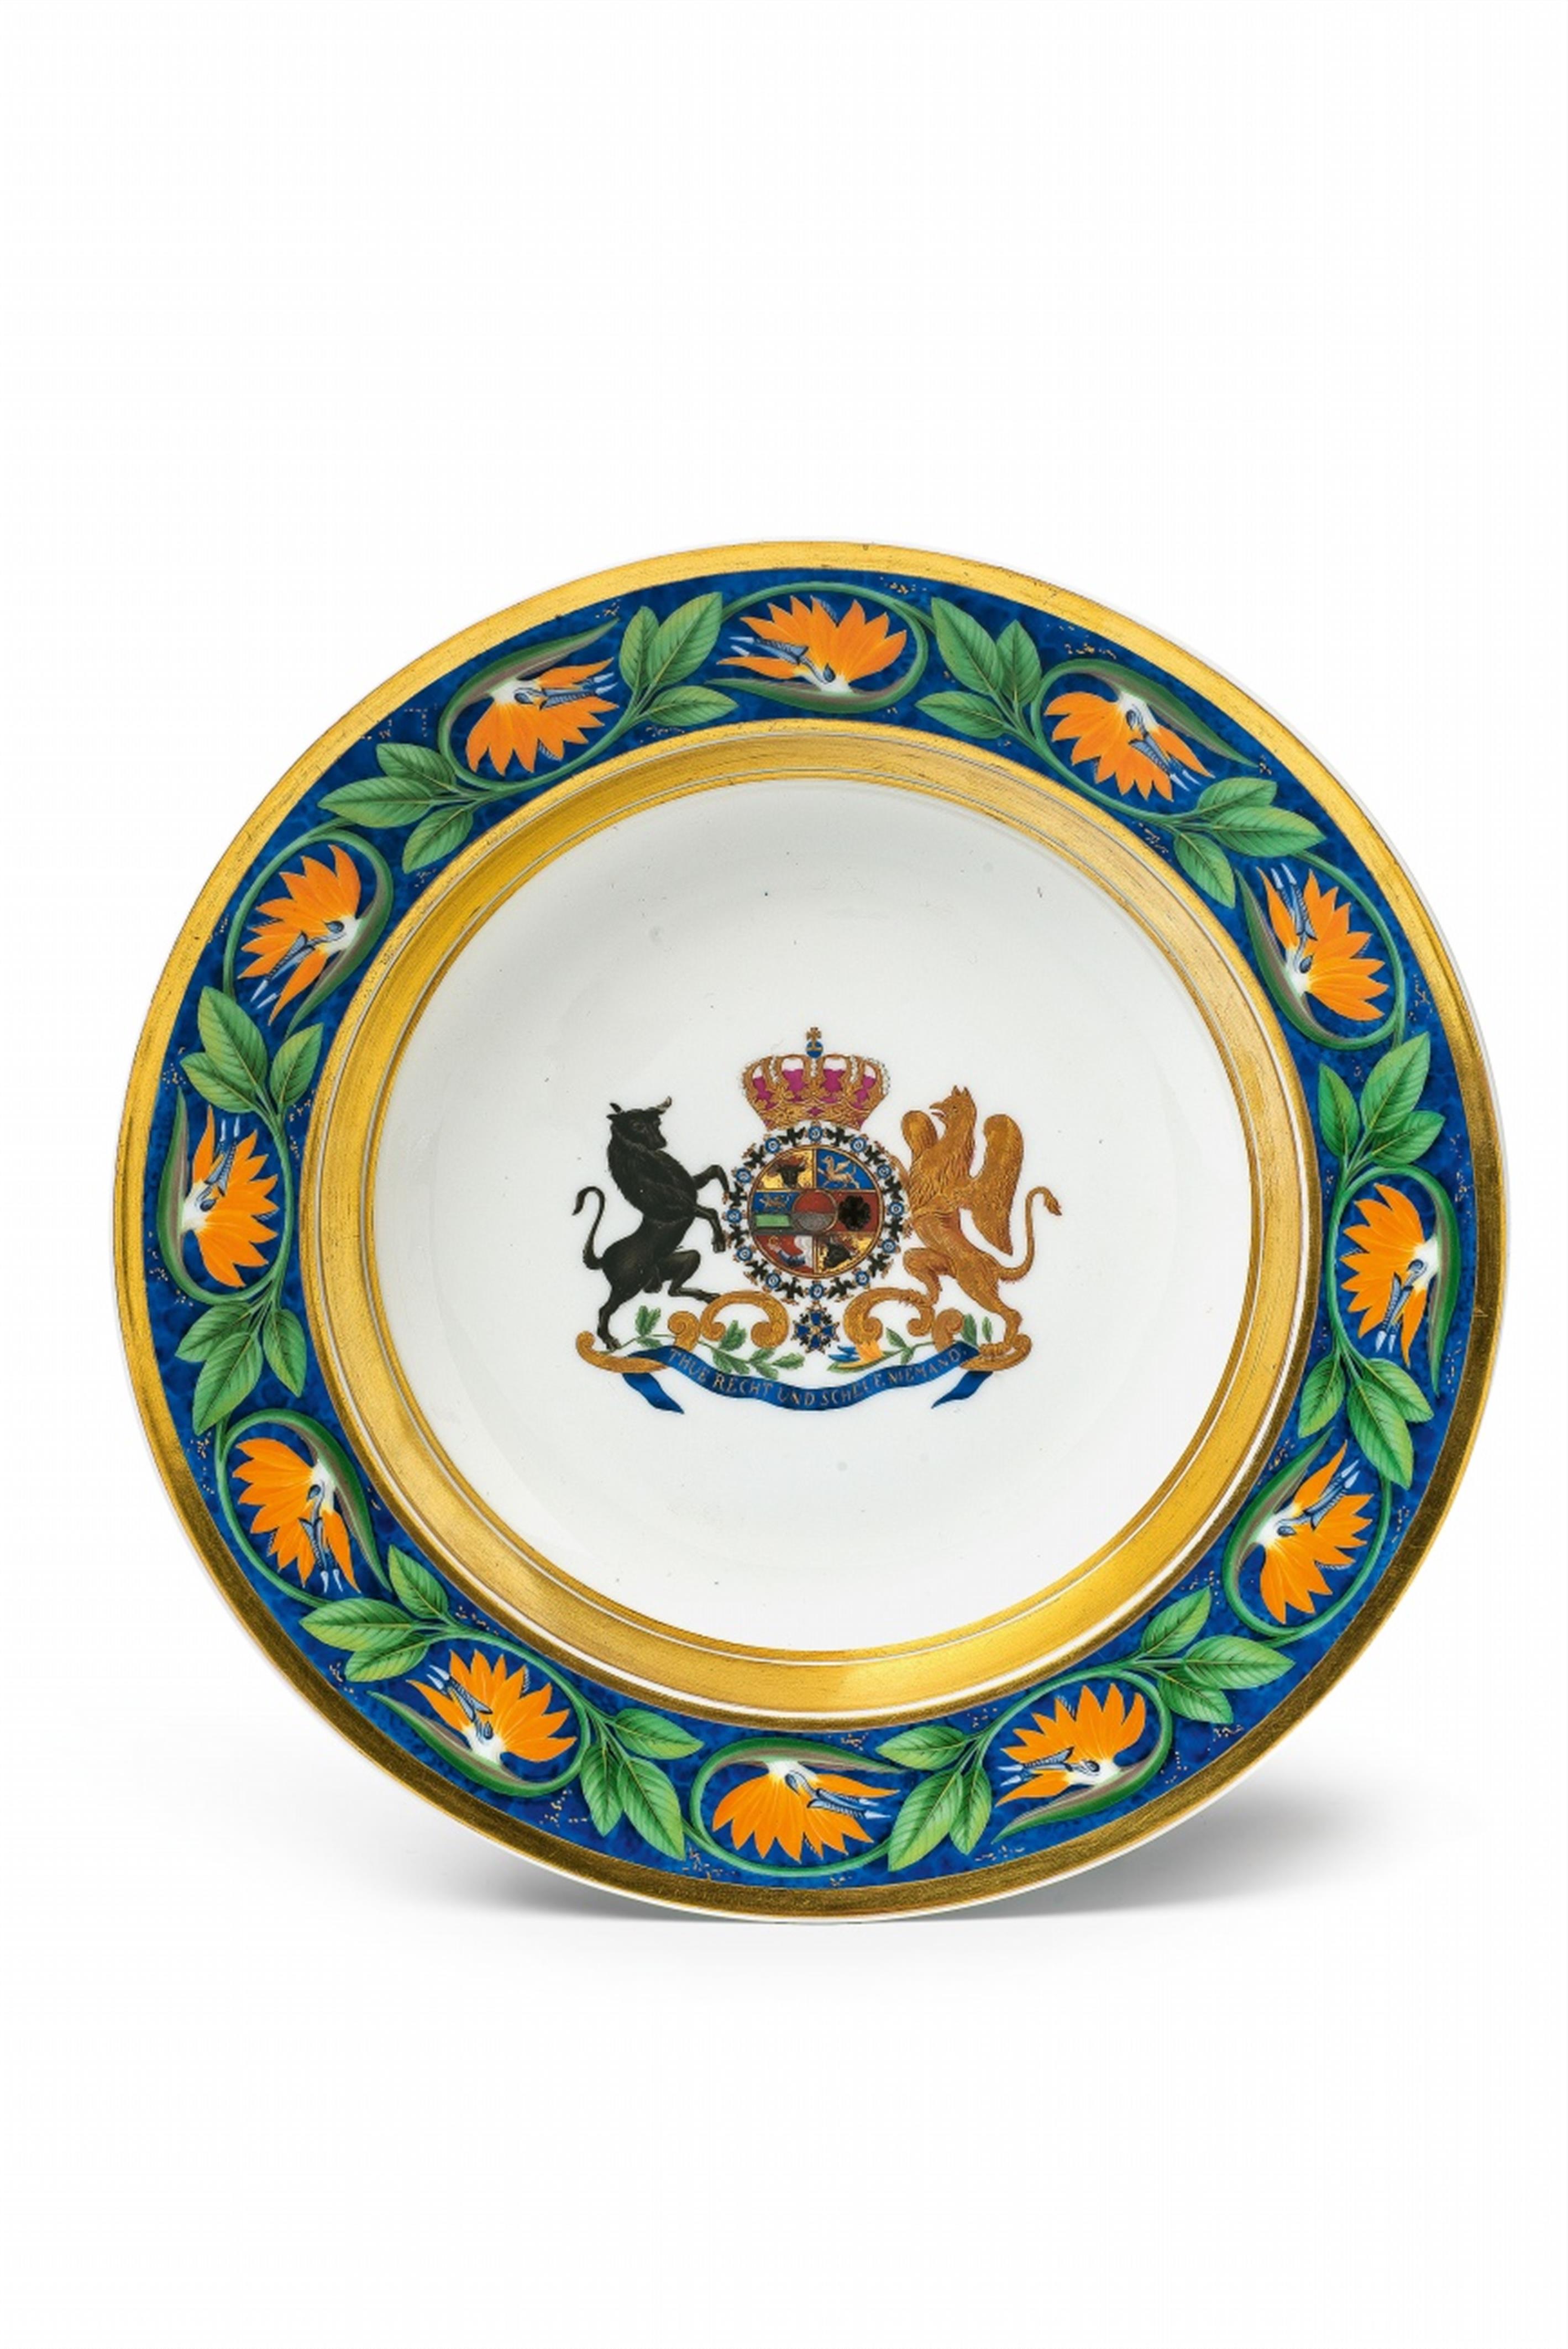 A Berlin KPM porcelain plate with the arms of Mecklenburg-Strelitz - image-1